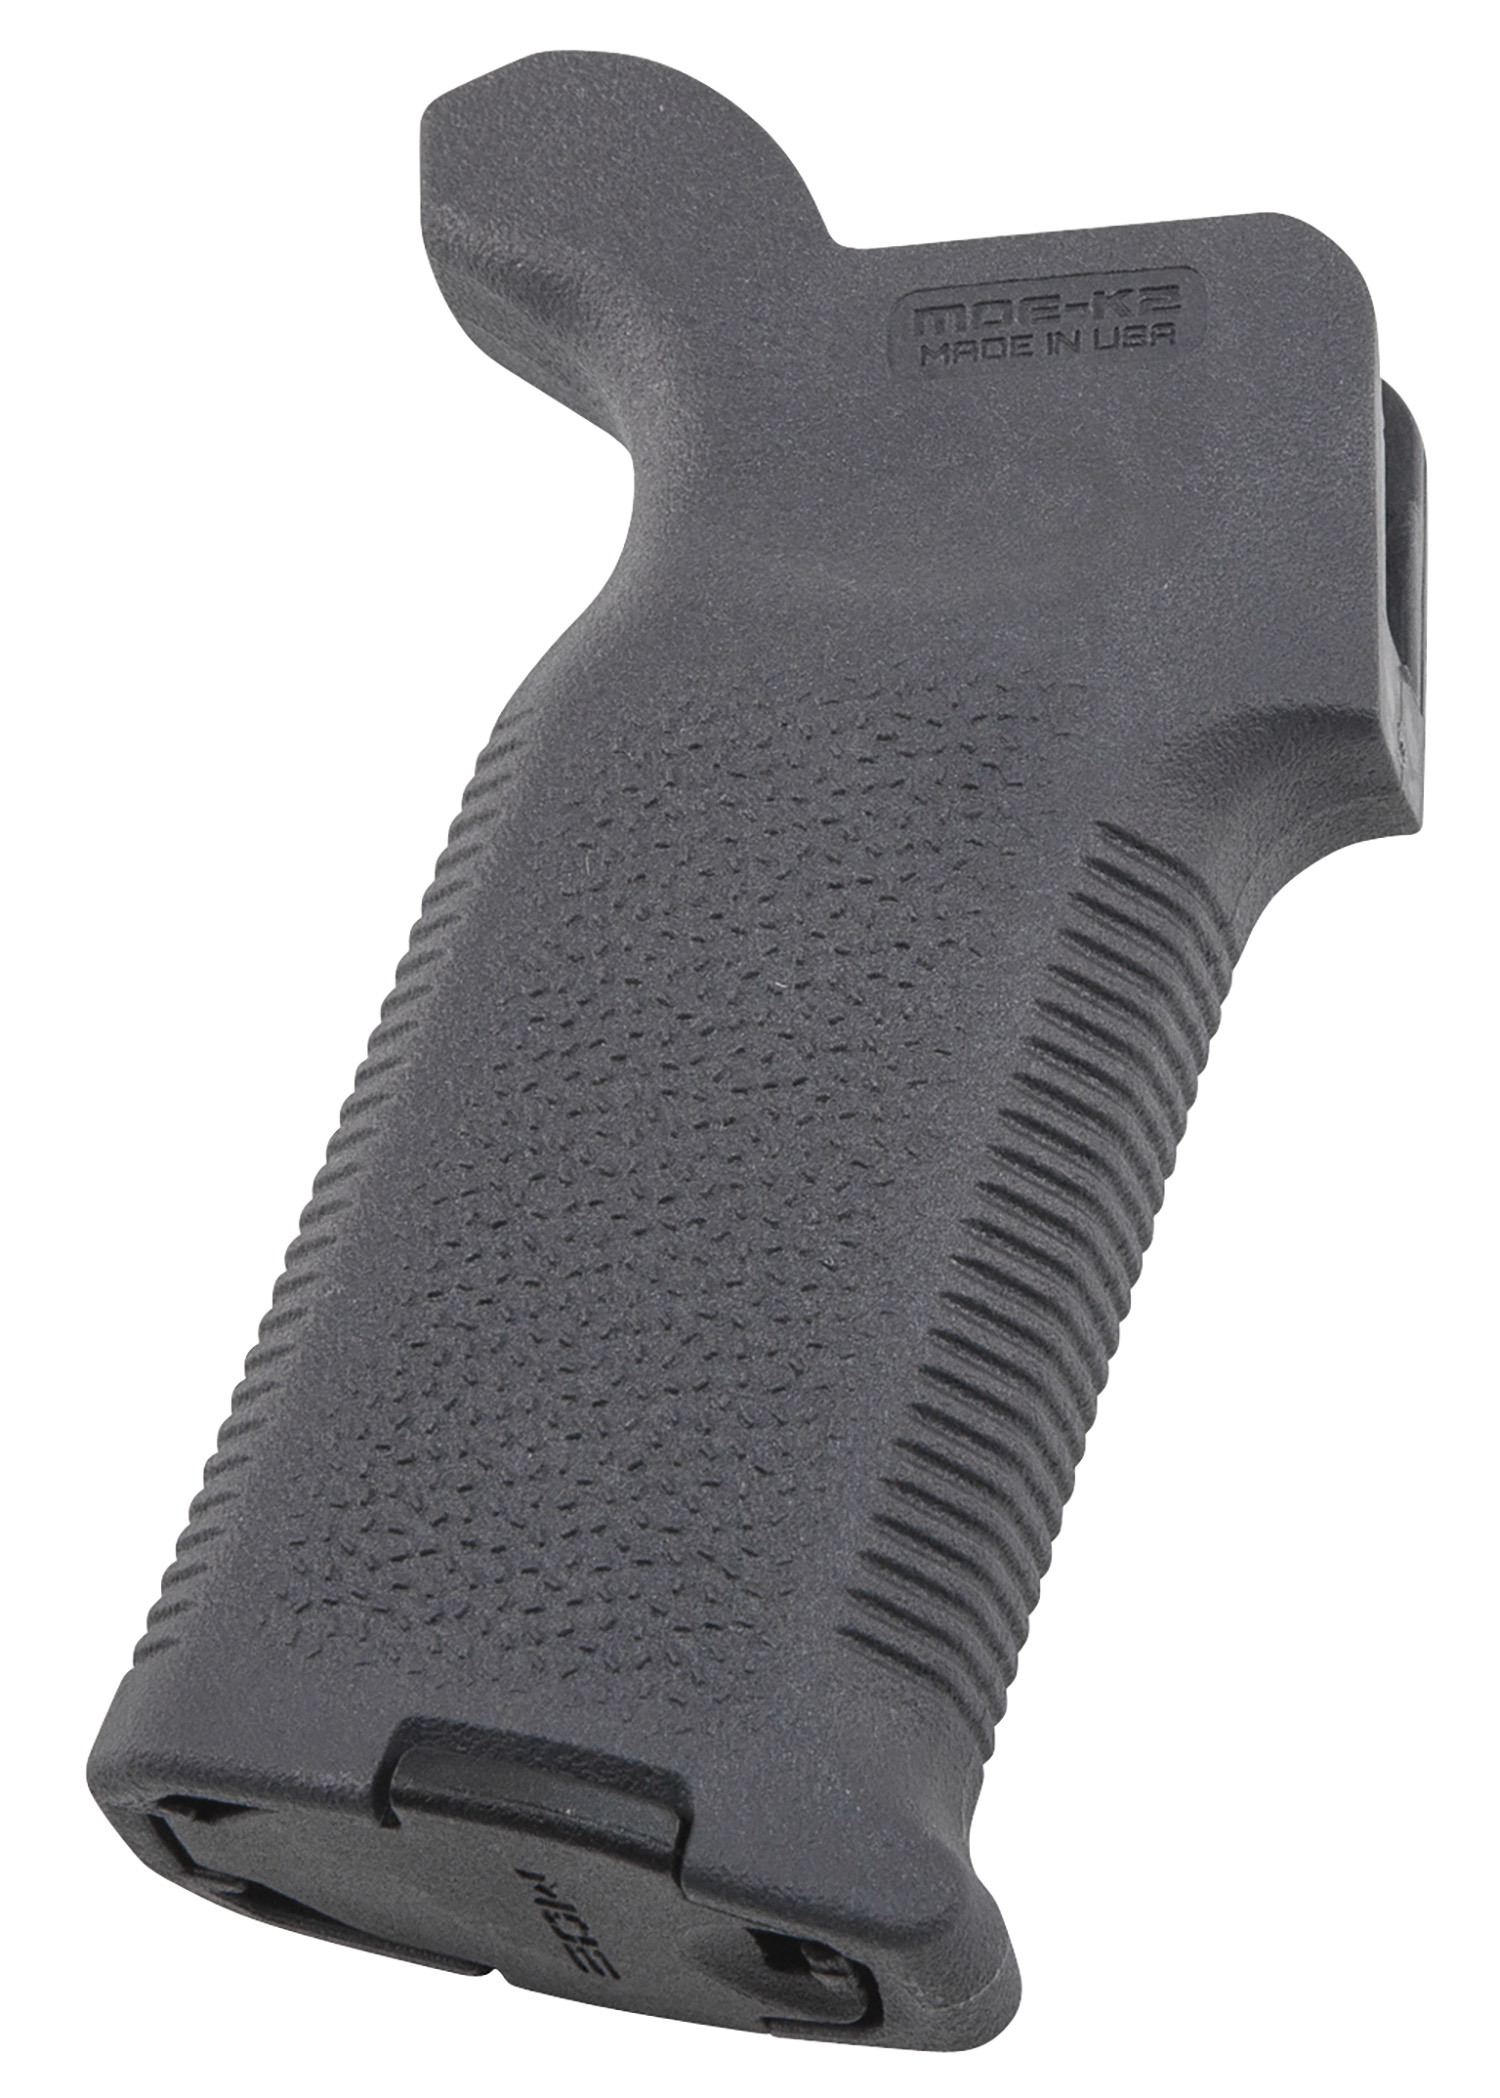 Magpul MAG522-GRY MOE-K2 Grip Aggressive Textured Gray Polymer for AR-15, AR-10, M4, M16, M110, SR25